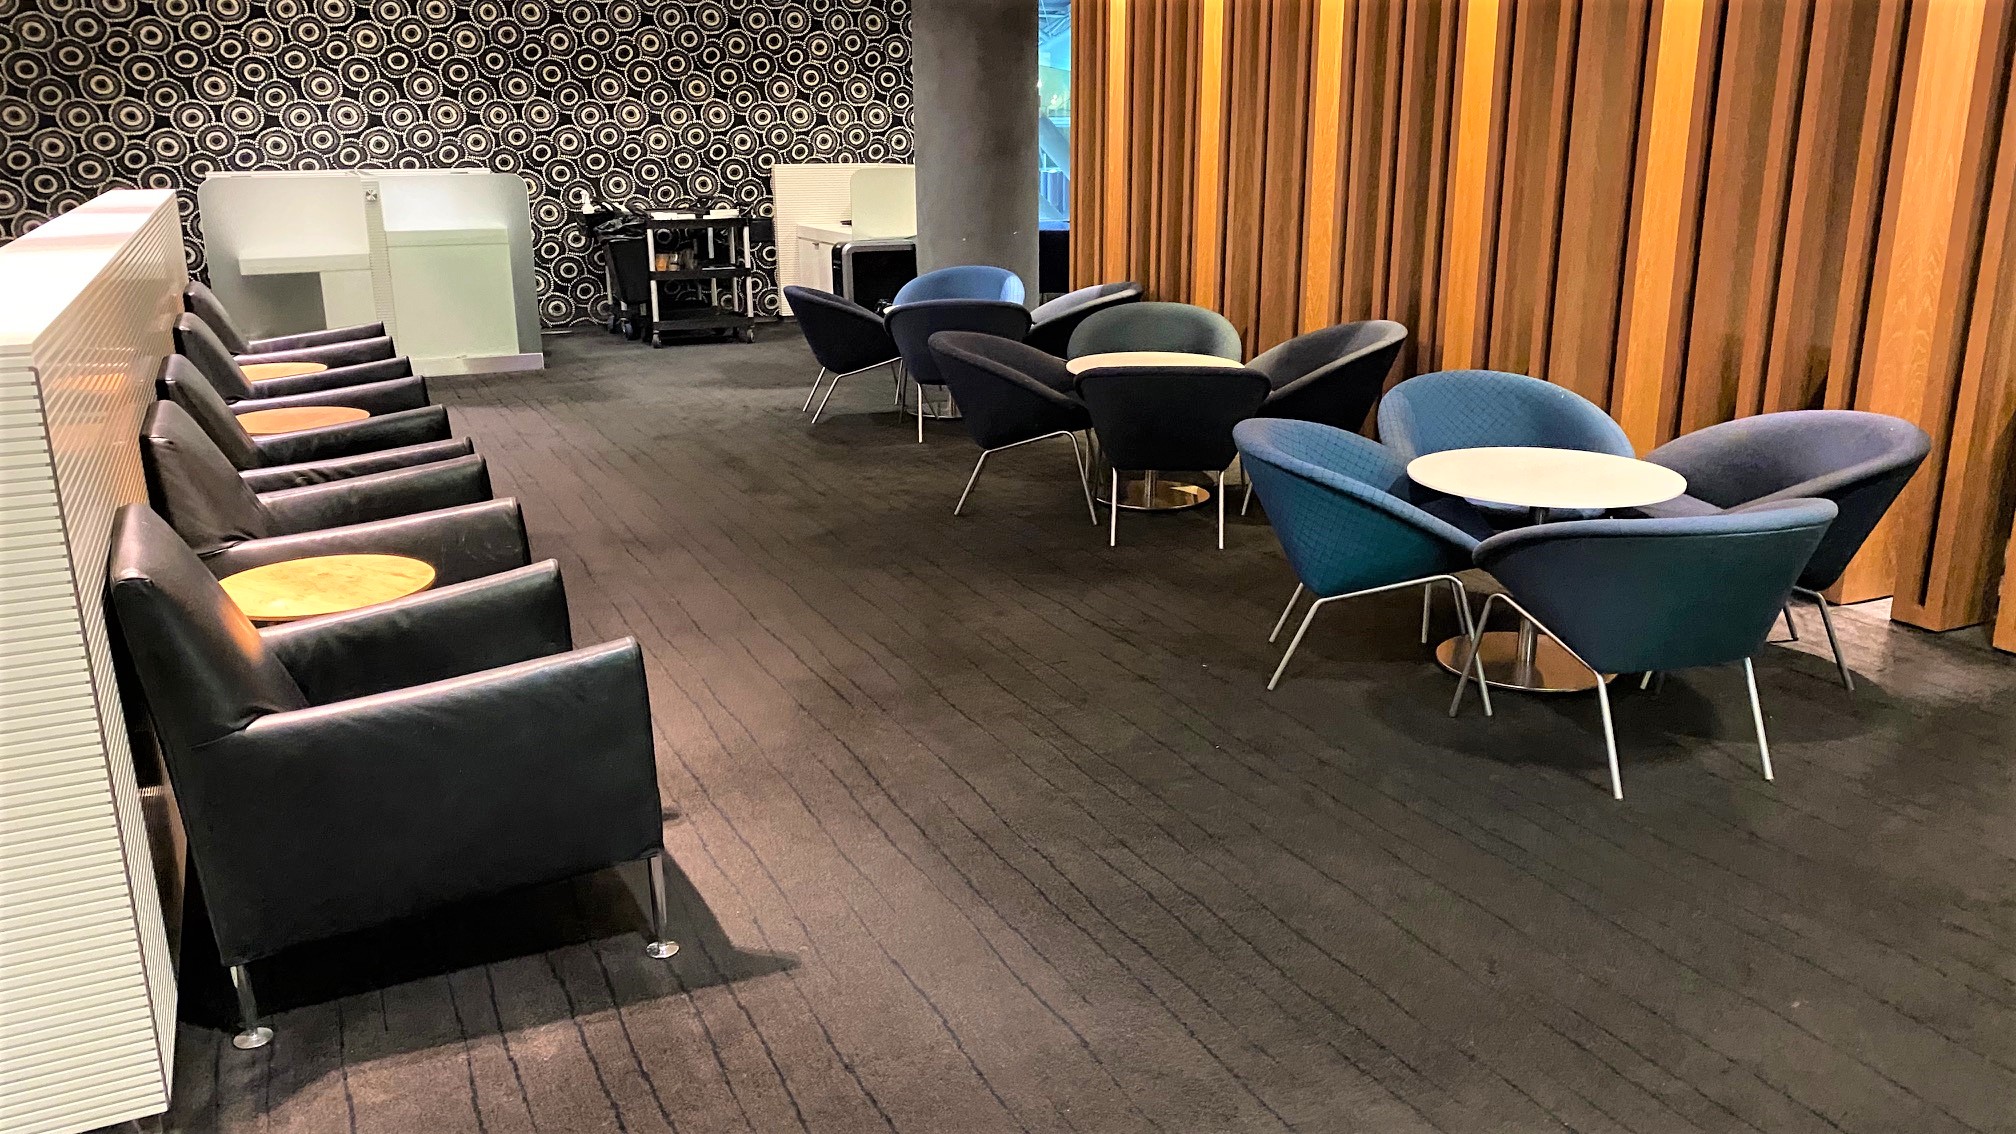 Seating, Qantas Domestic Business Lounge - Sydney Airport